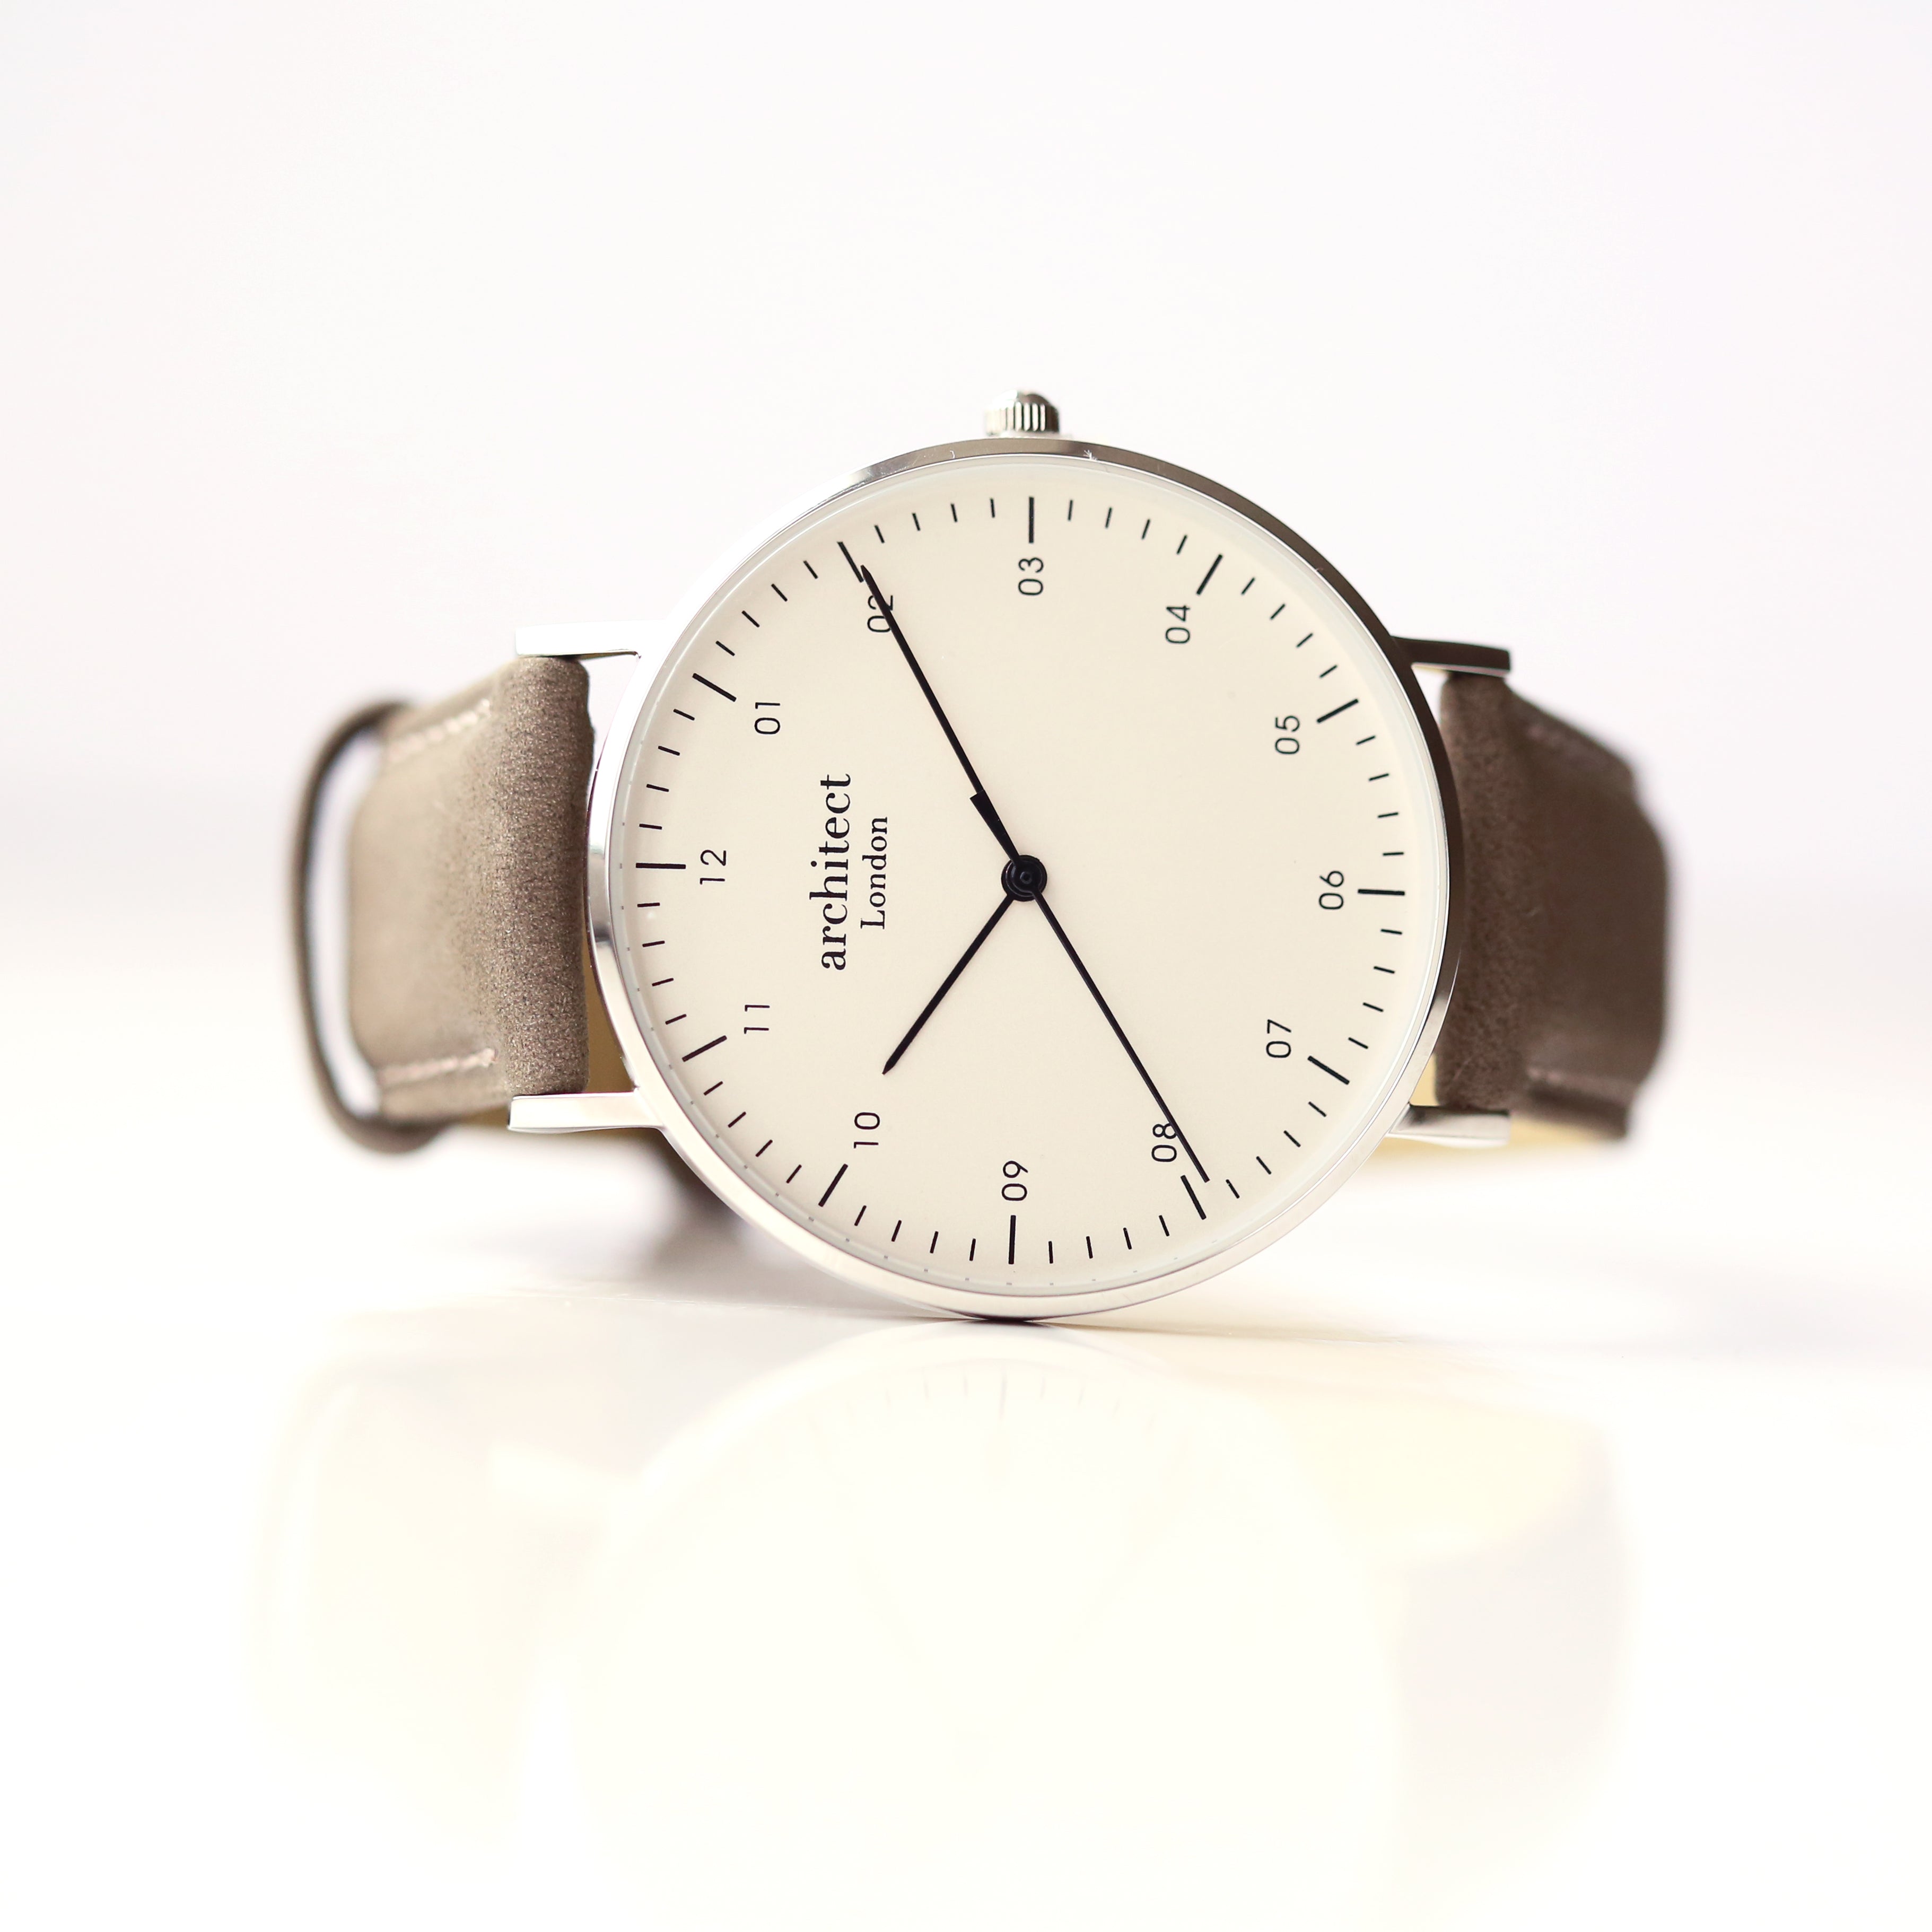 Architect Watches - A Minimalist Watch For Men